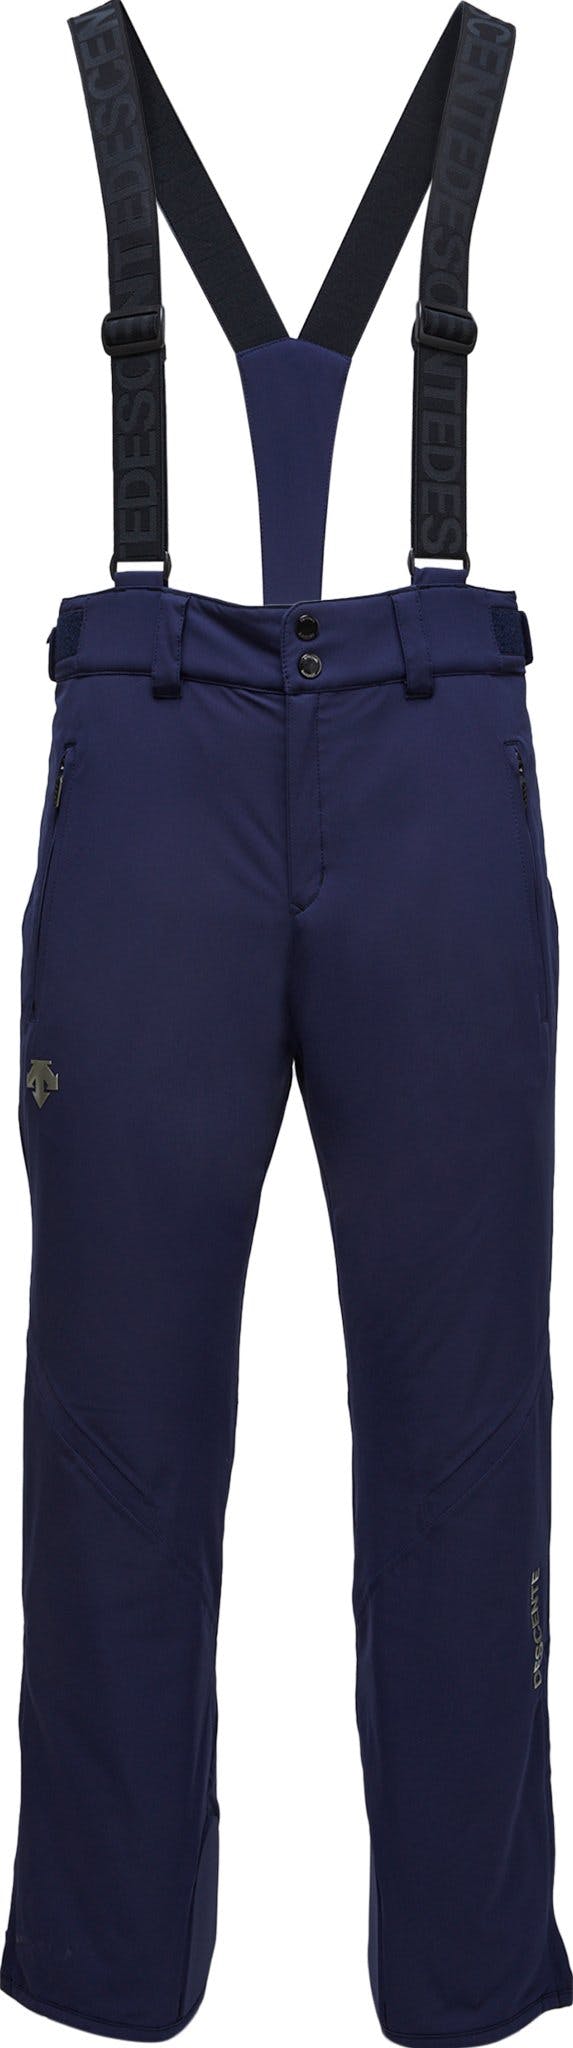 Product image for Roscoe Insulated Pants - Men's